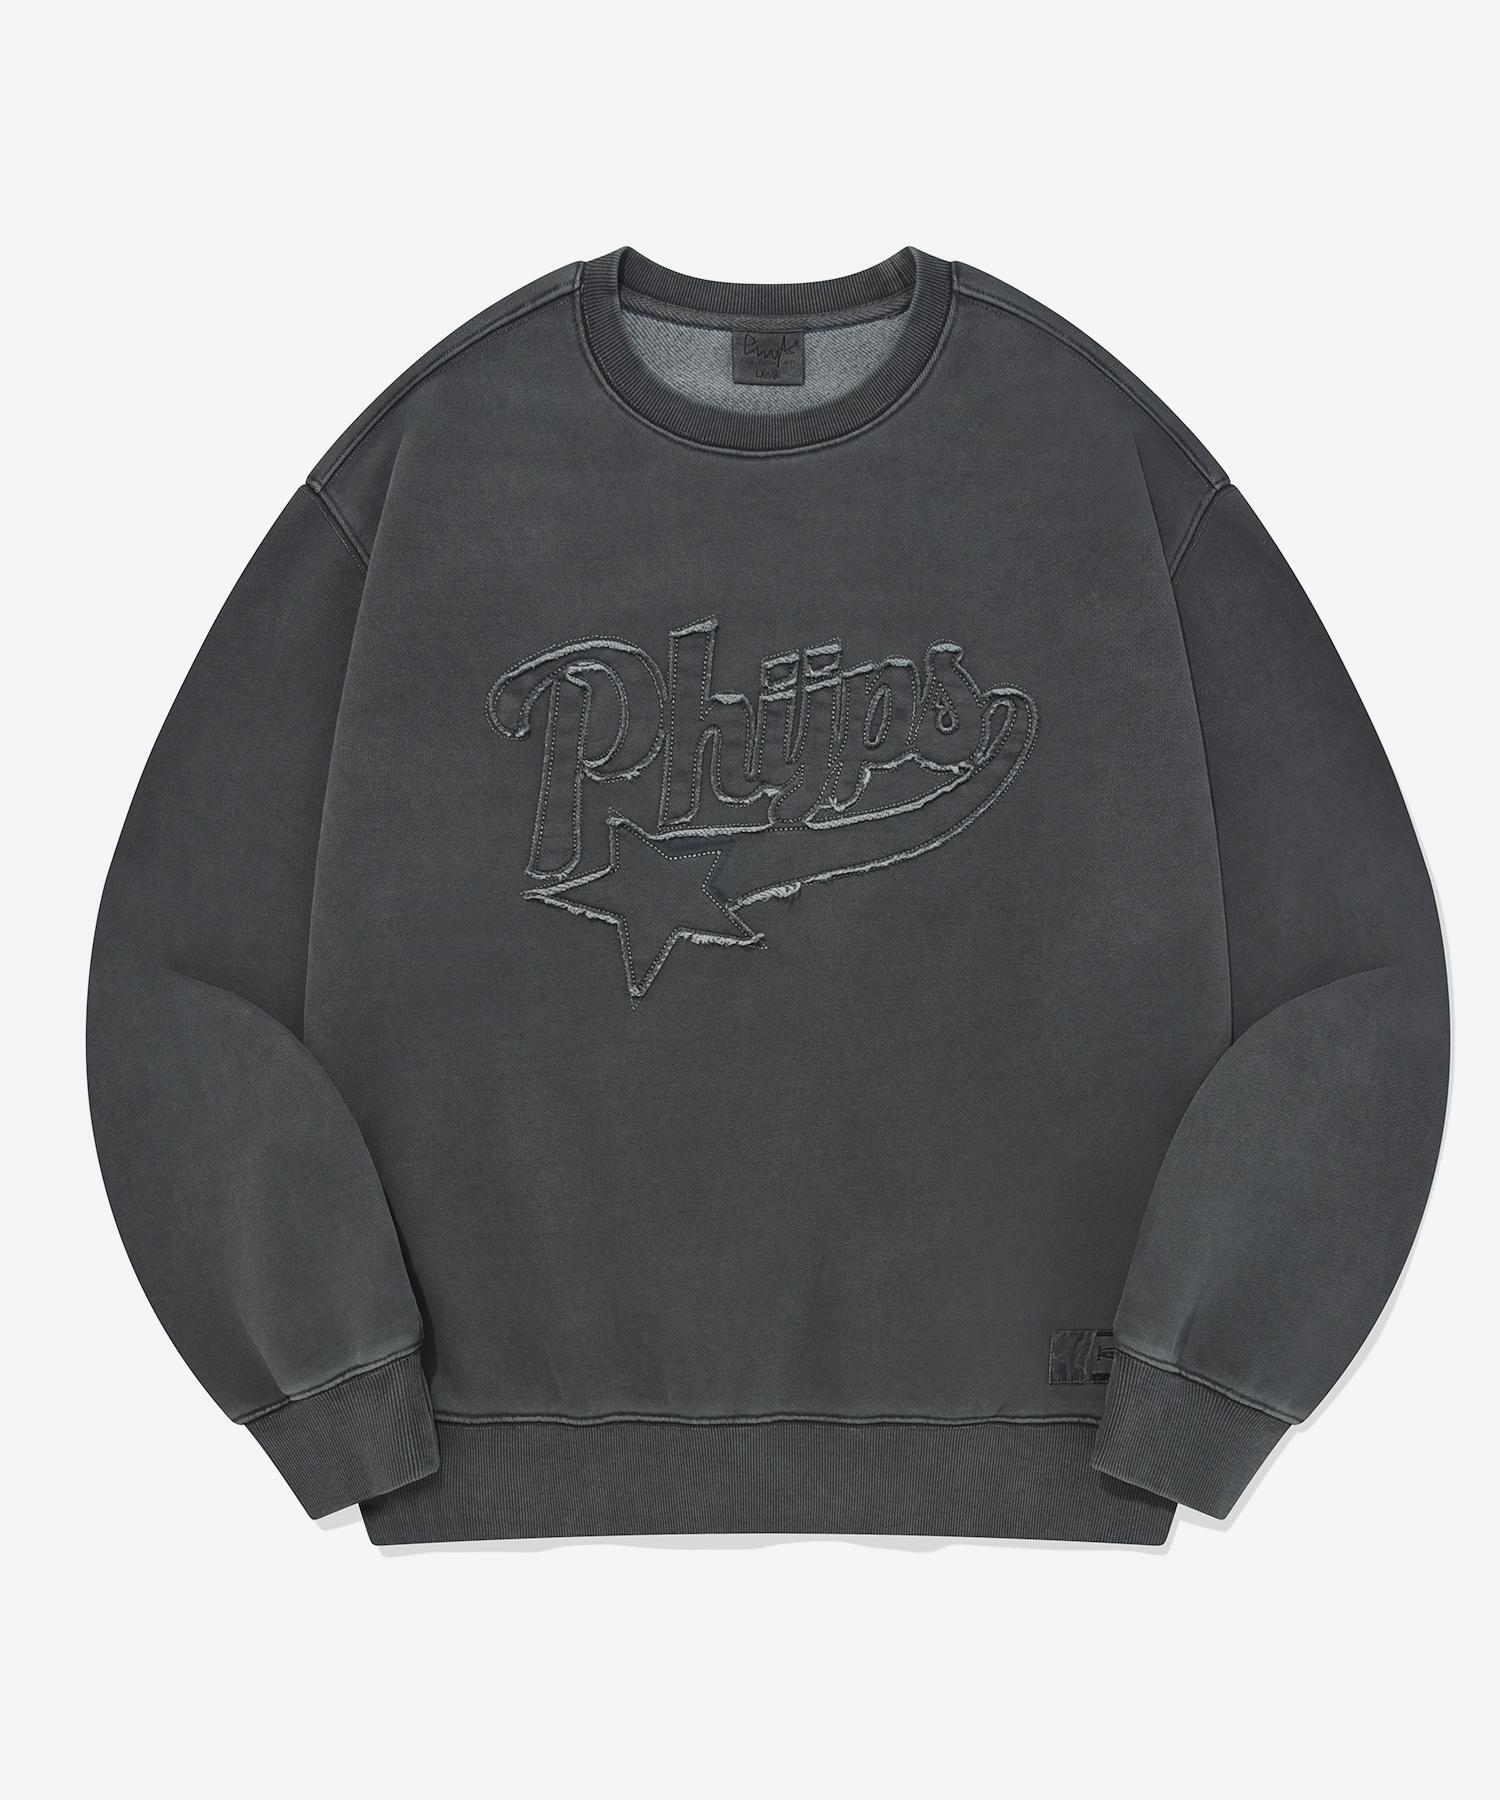 STAR TAIL CREWNECK PG BLUE CHARCOAL